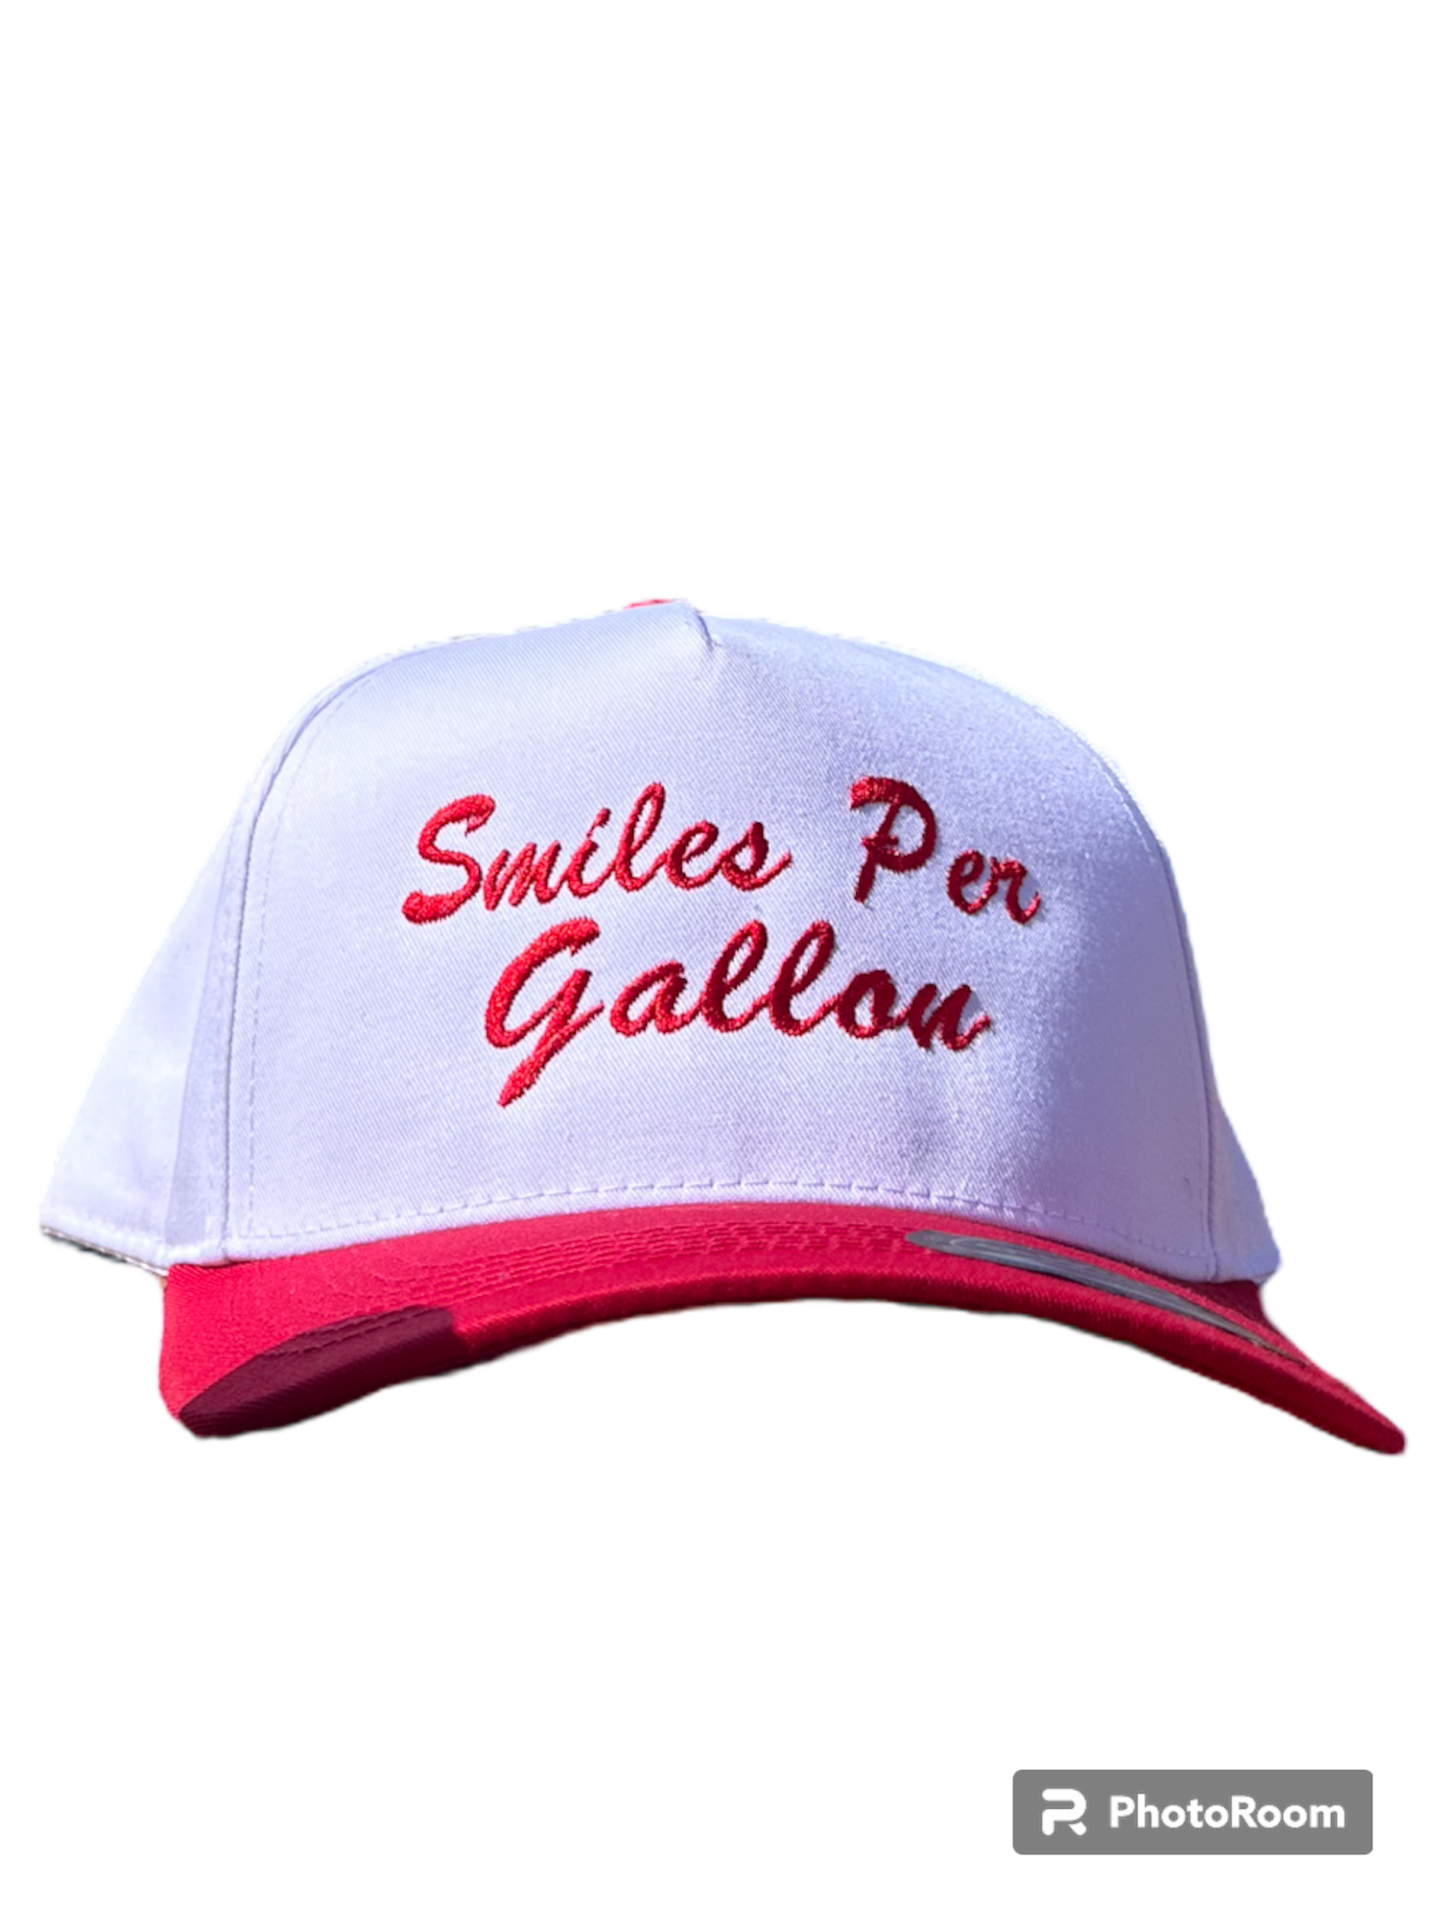 Smiles per Gallon red A frame SnapBack